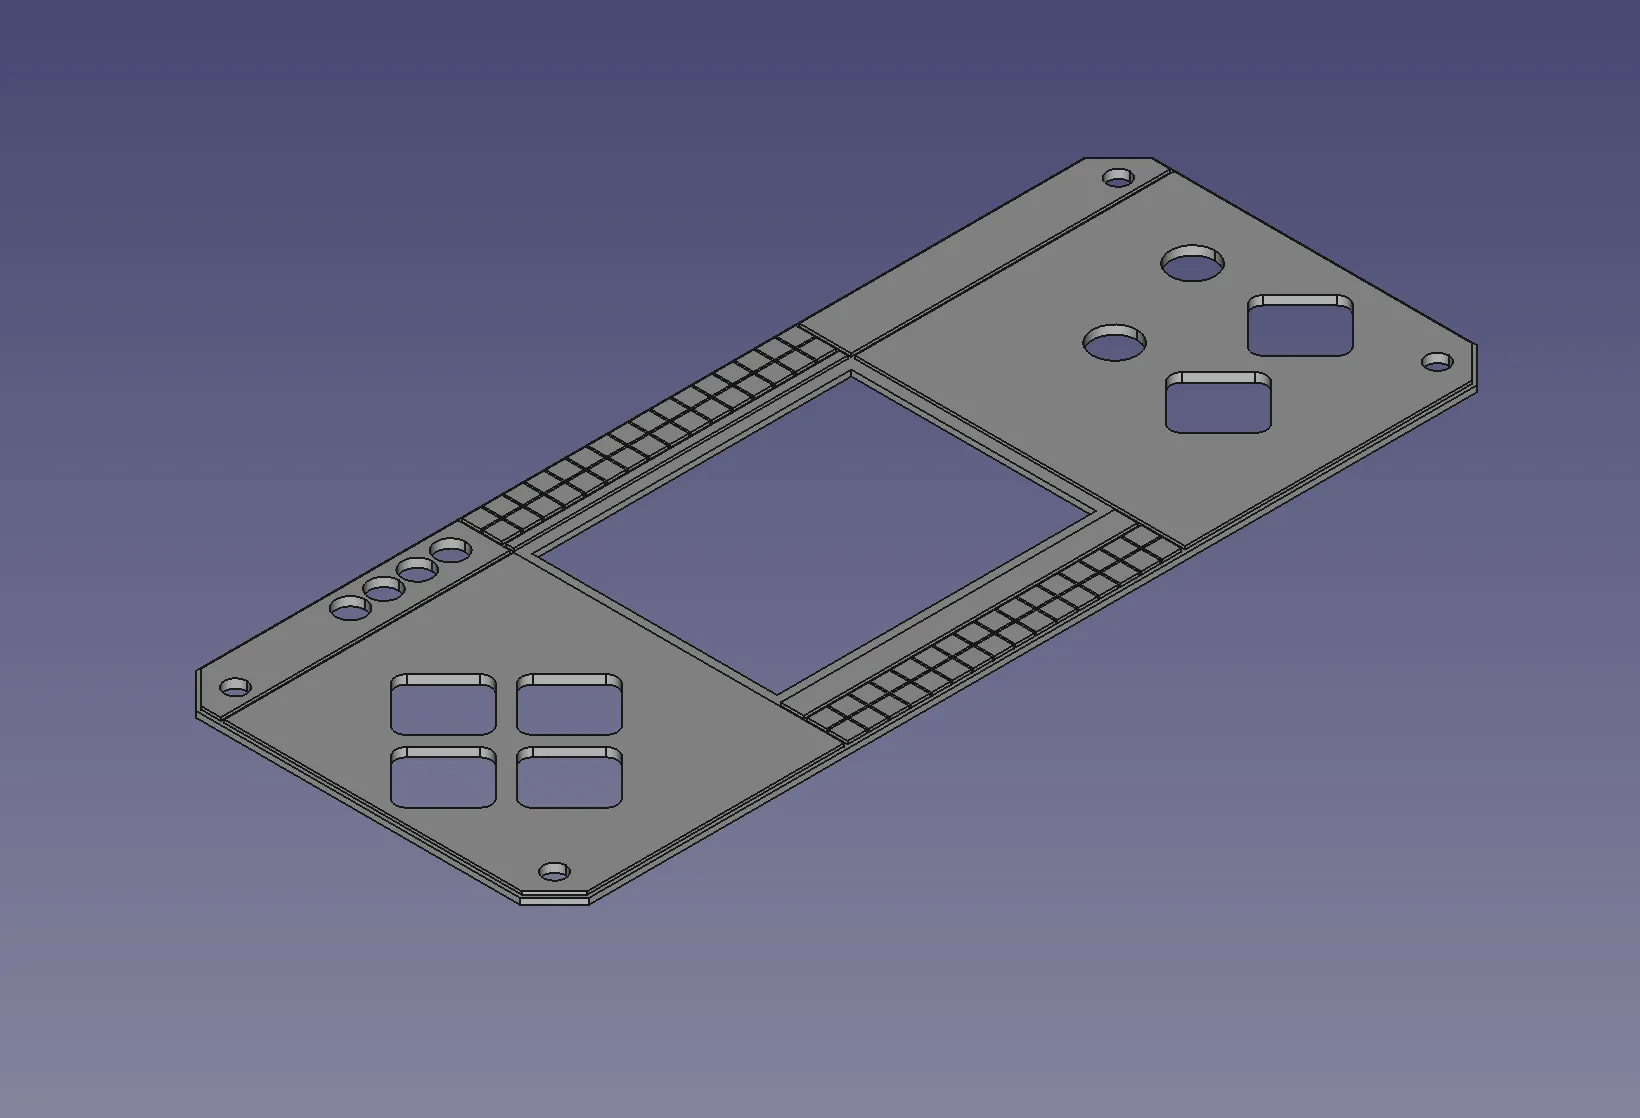 3D model of the top plate